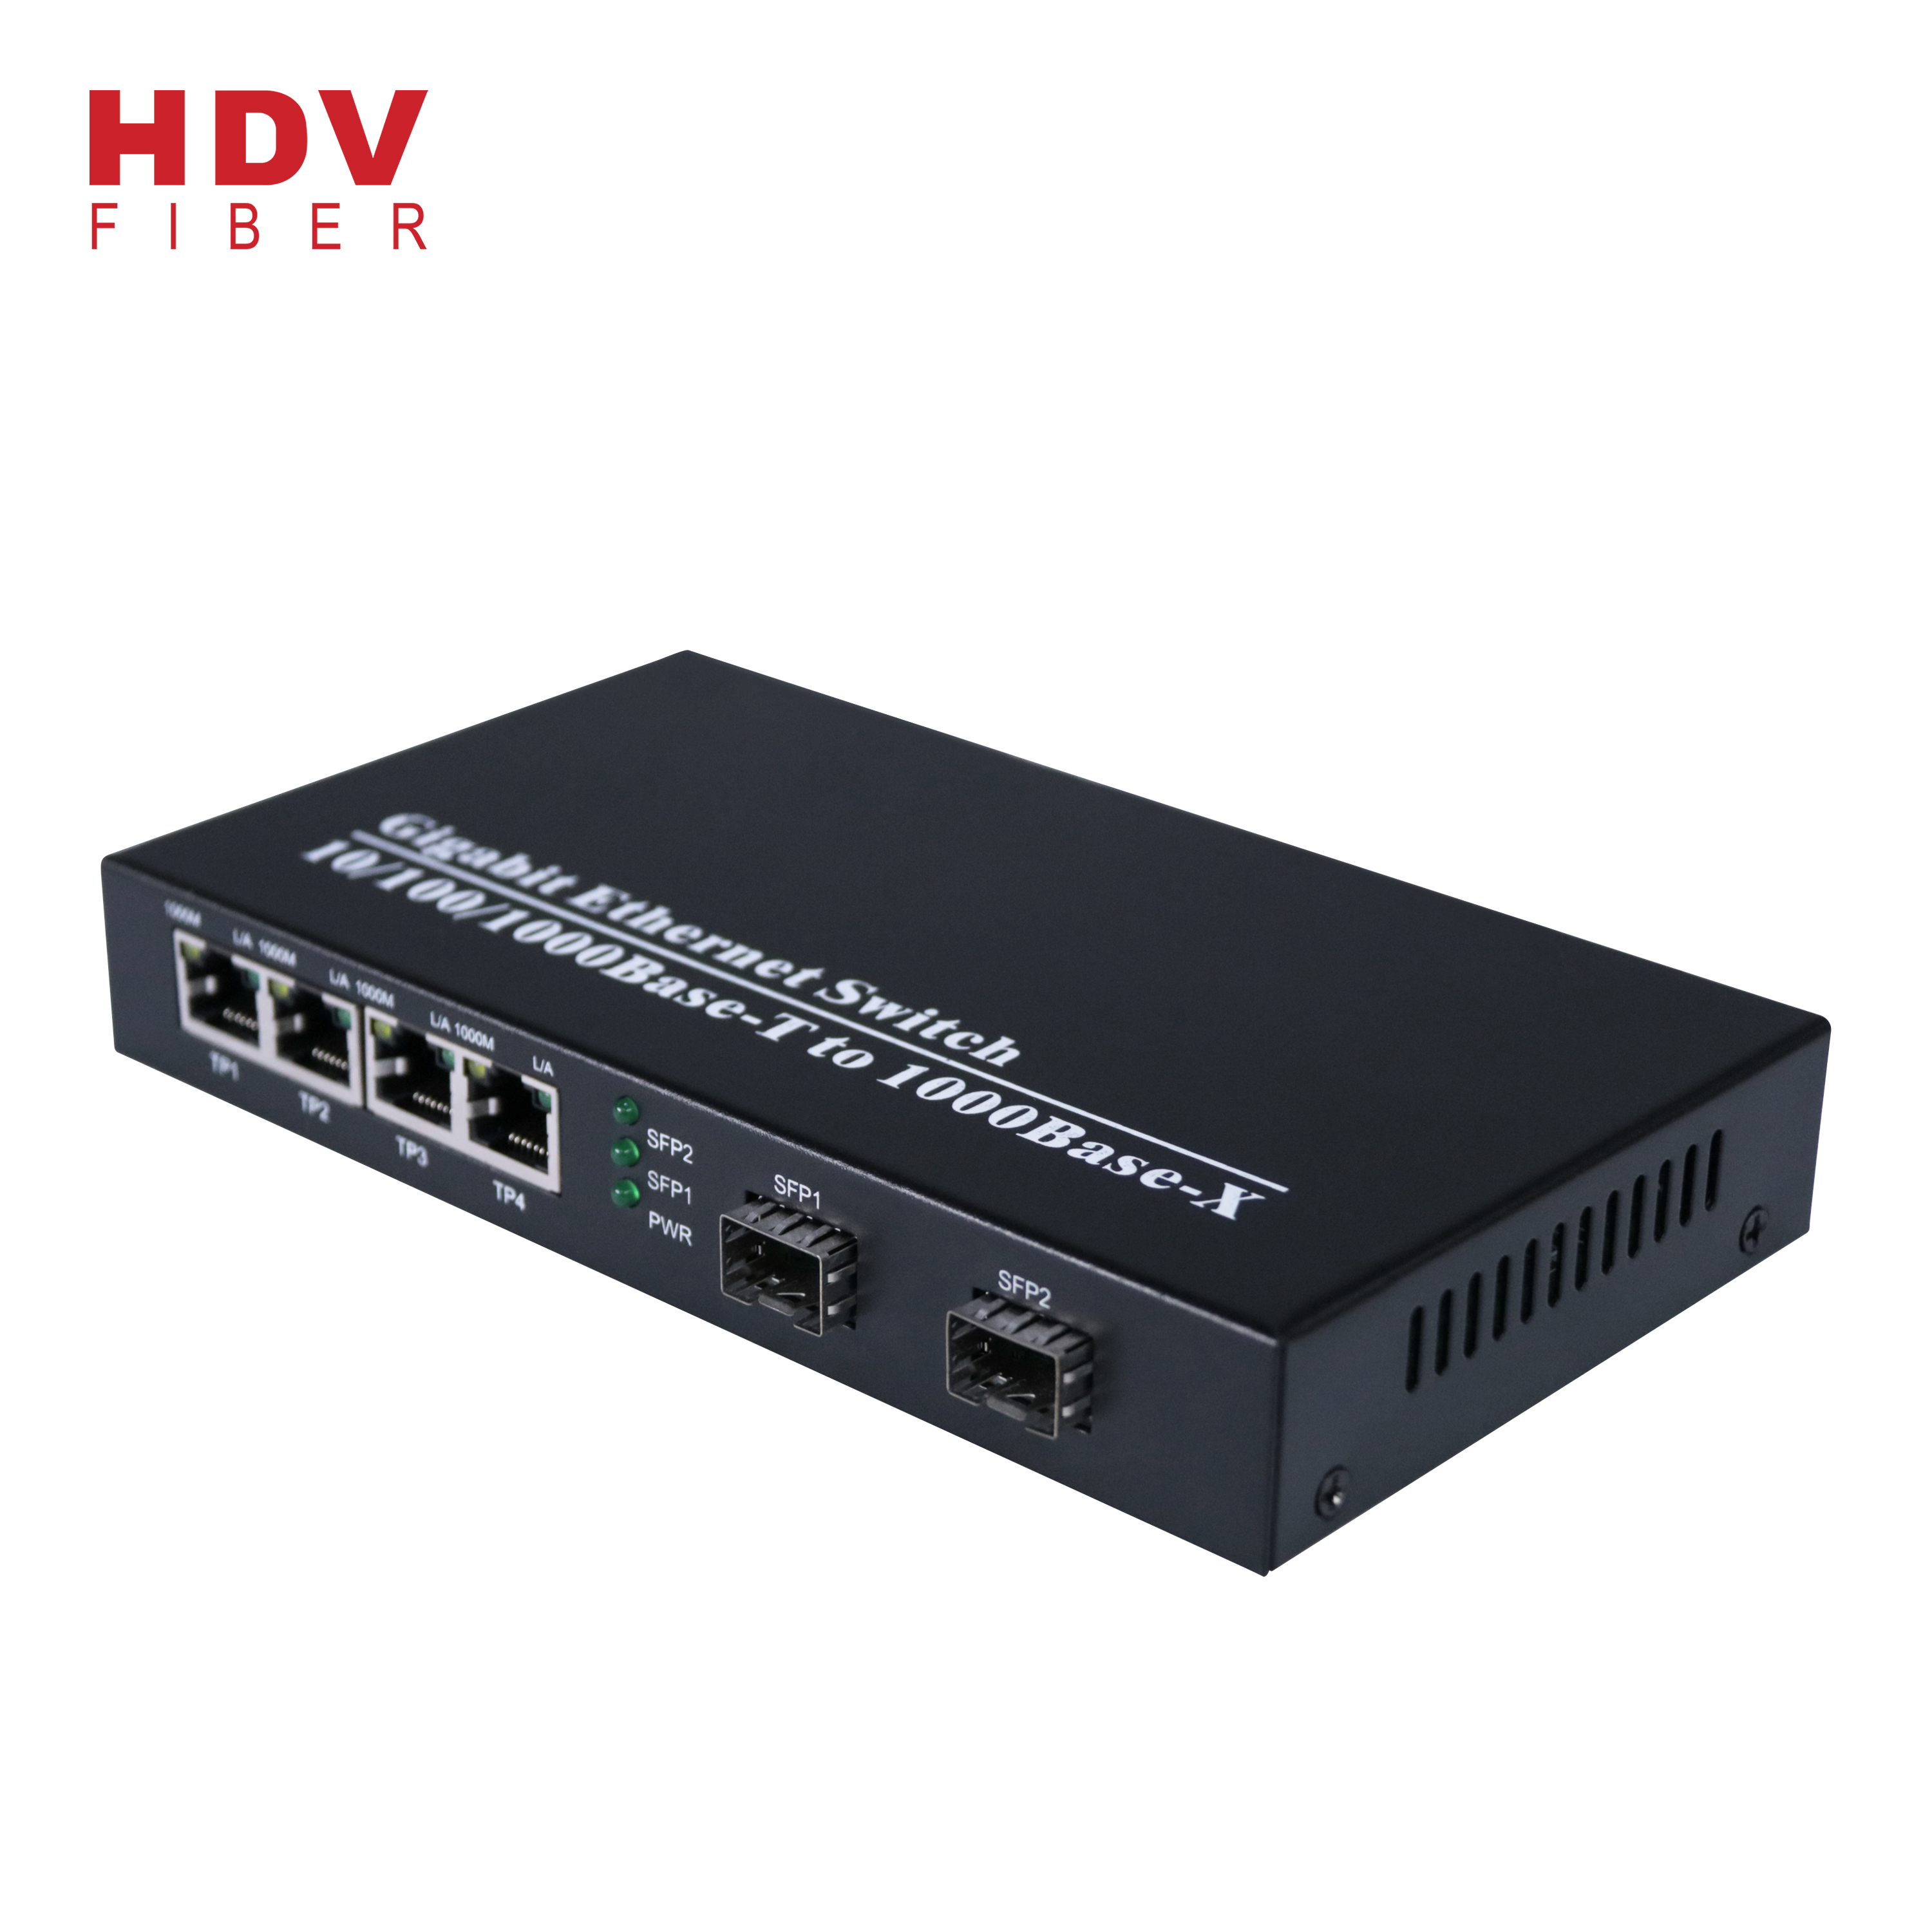 Wholesale Price China Wireless Ethernet Gateway – 4 Port Gigabit Ethernet Switch and 2 SFP Ports 1000M fiber optic transceiver switch – HDV